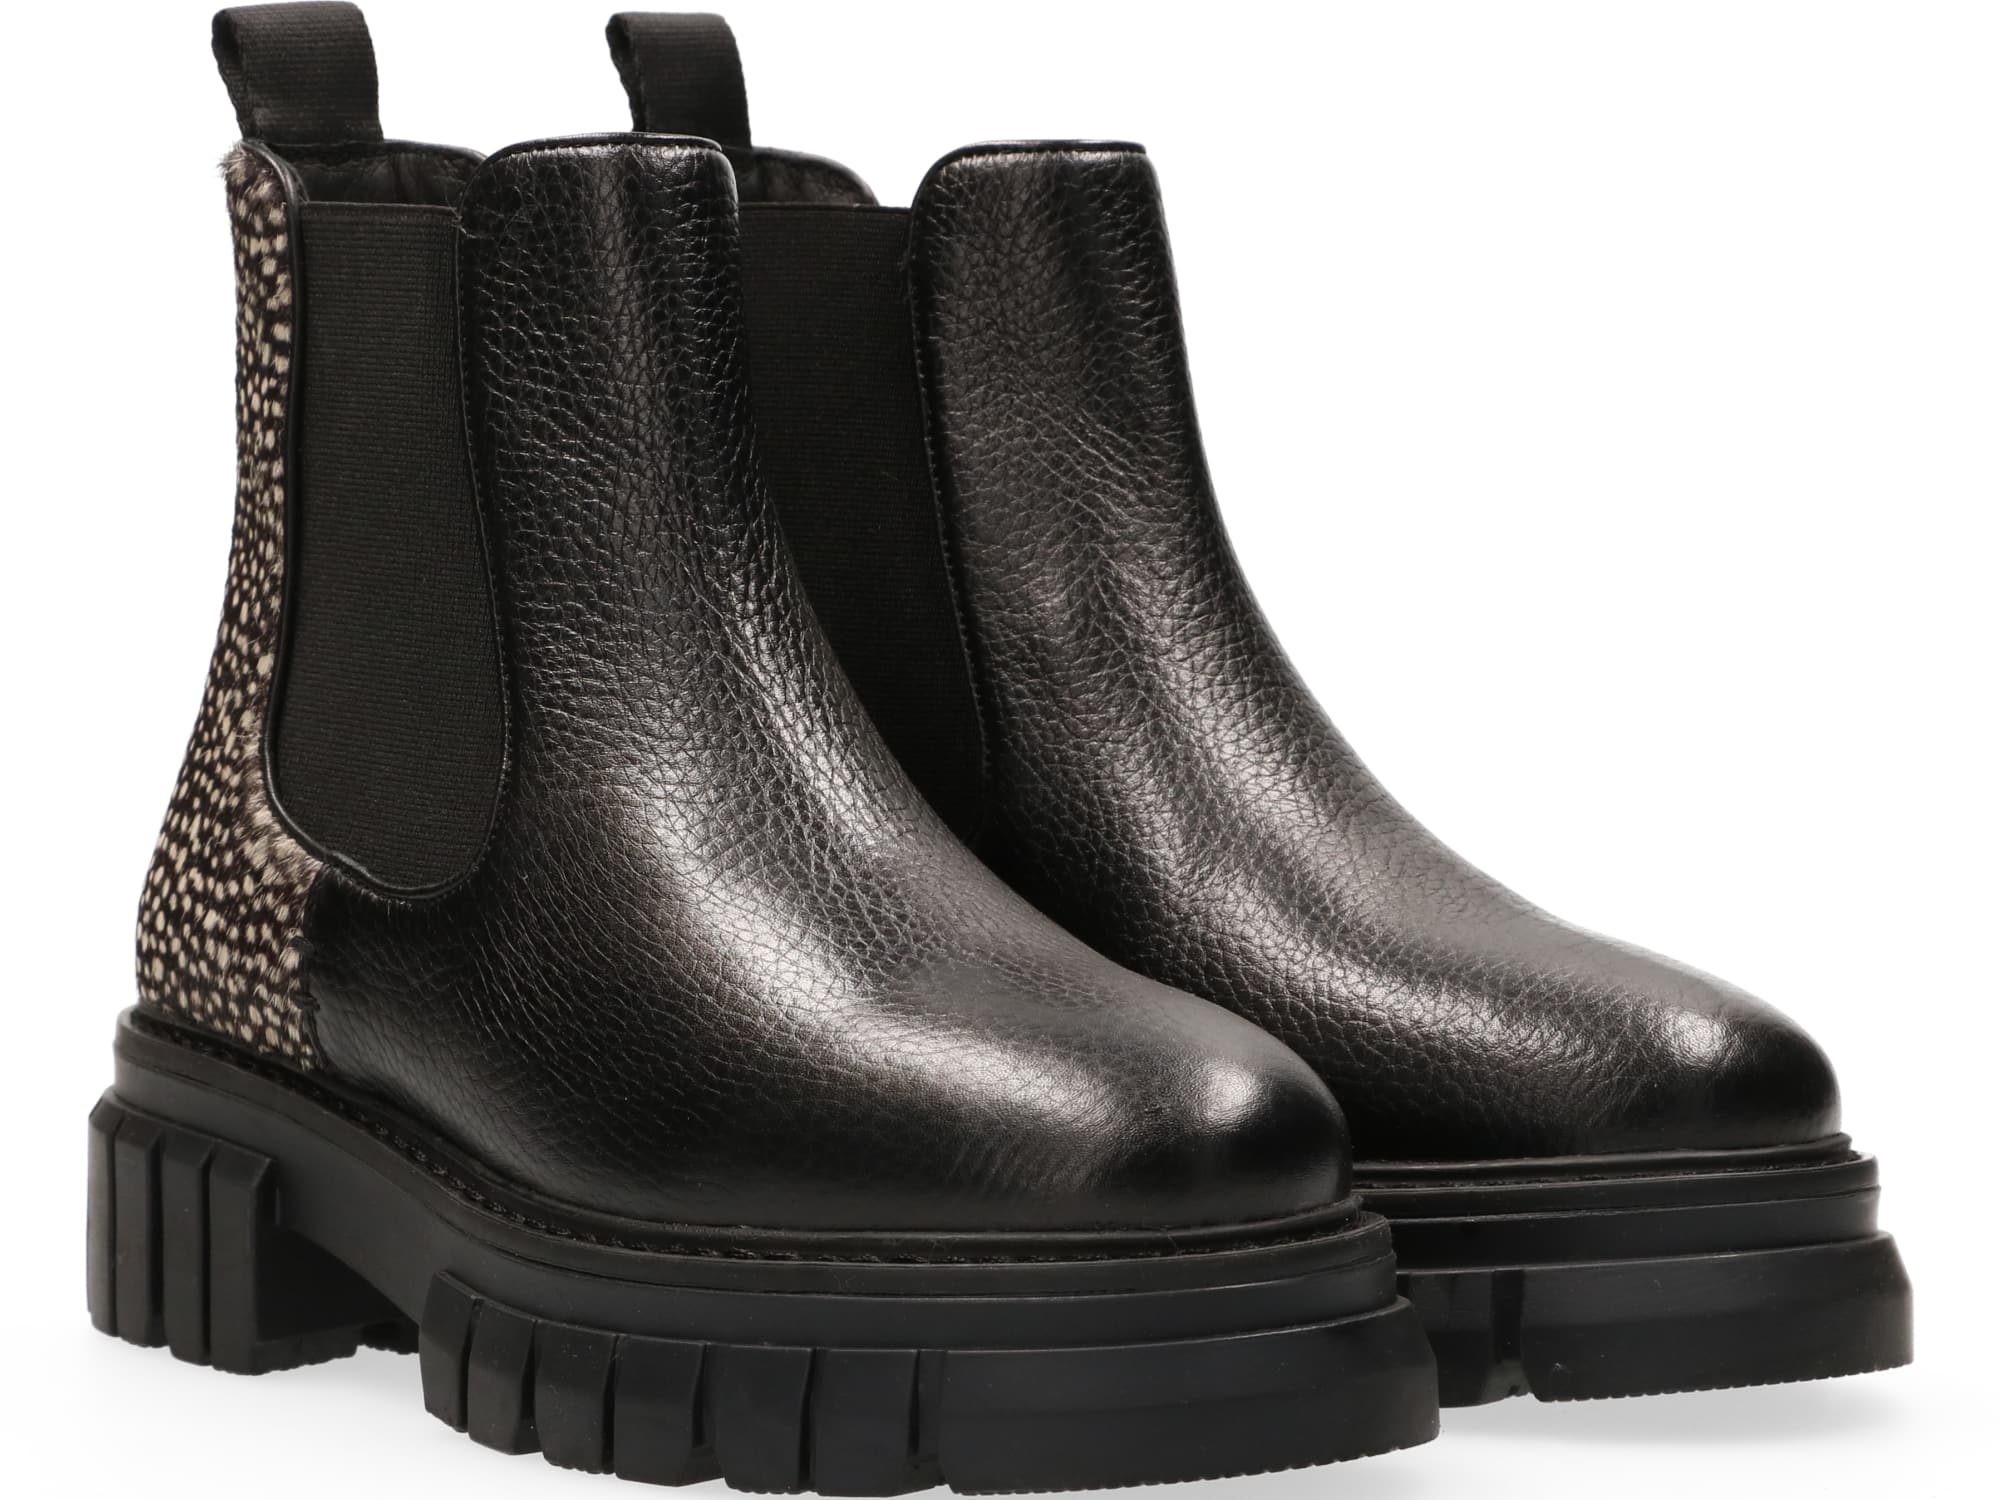 Tygo Boots in Black